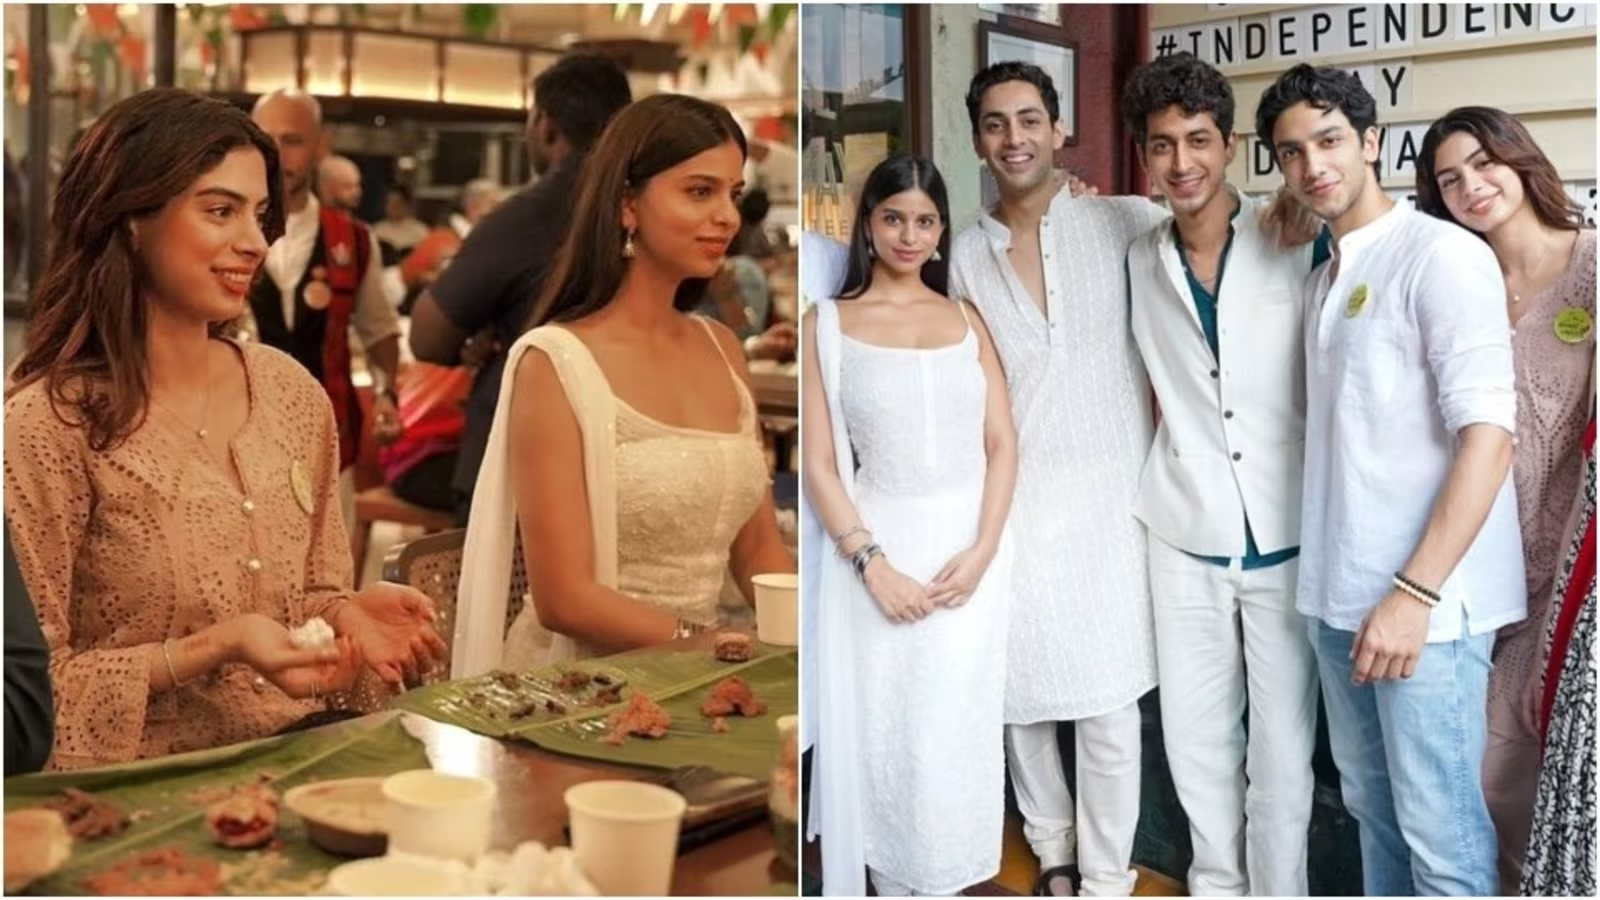 Suhana Khan and Khushi Kapoor's Attire for Independence Day Celebration as Servers in a Mumbai Restaurant